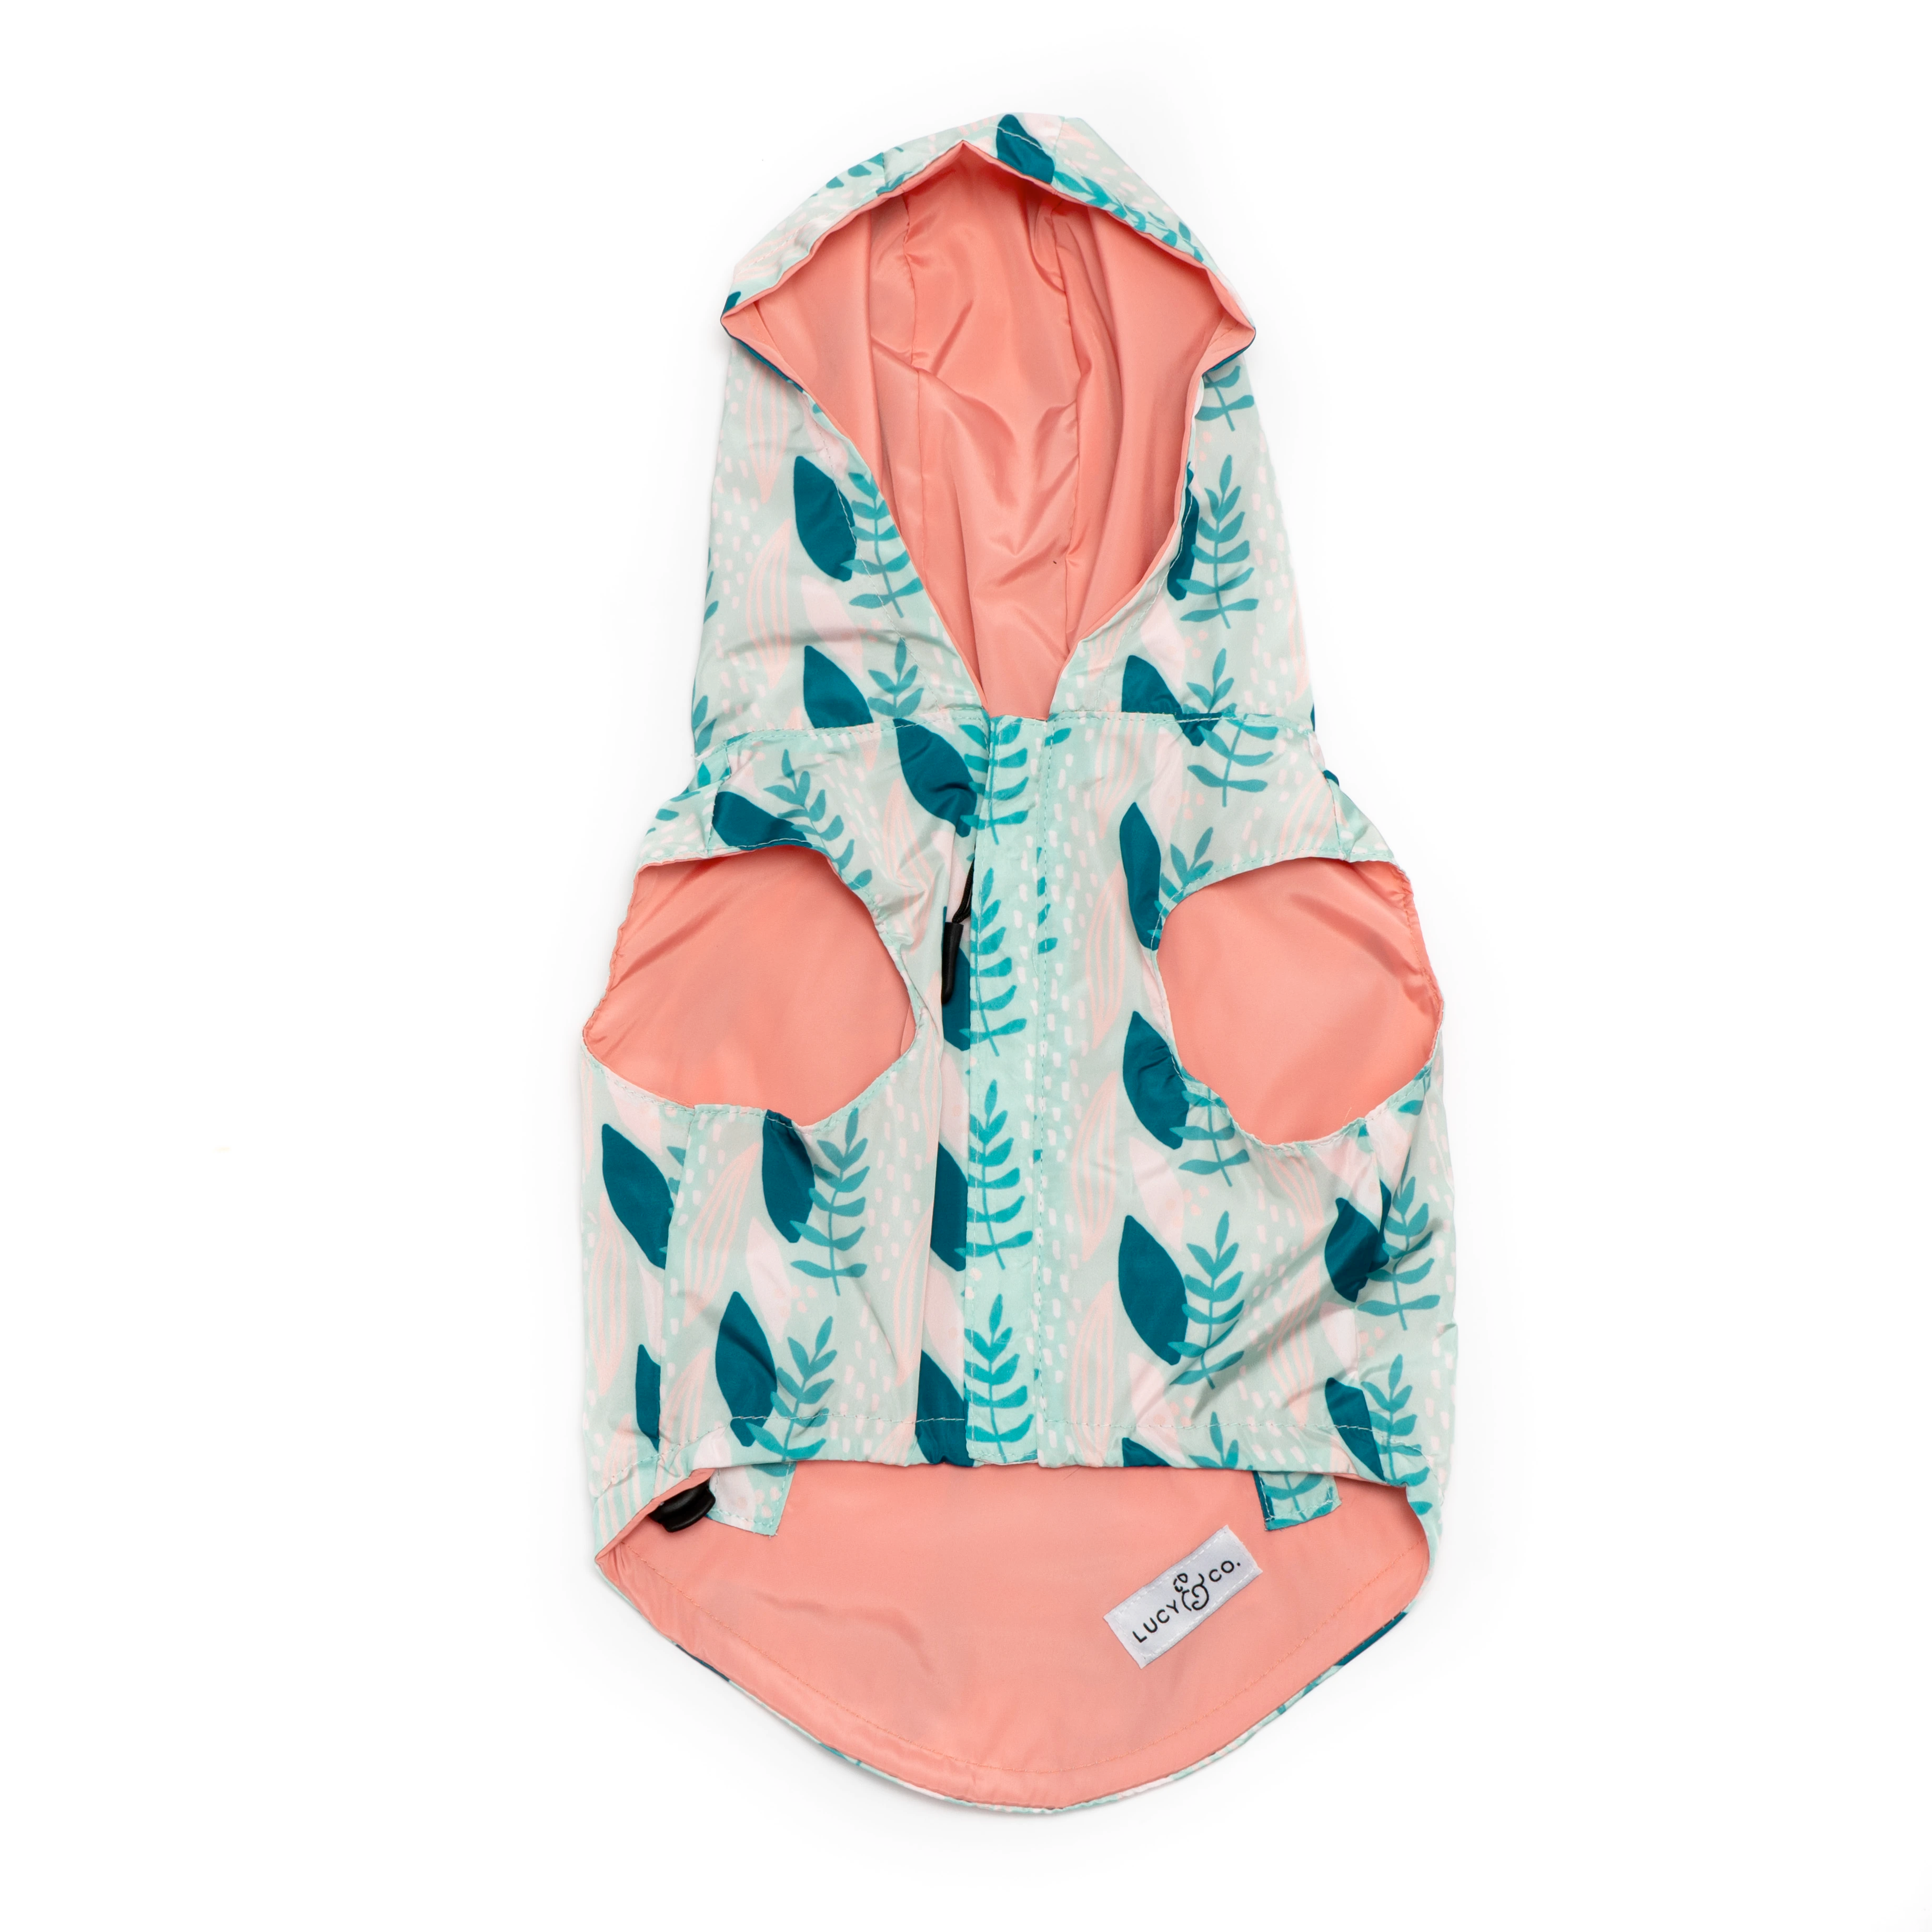 Lucy&Co Reversible Raincoat for Dogs, Minty Fresh